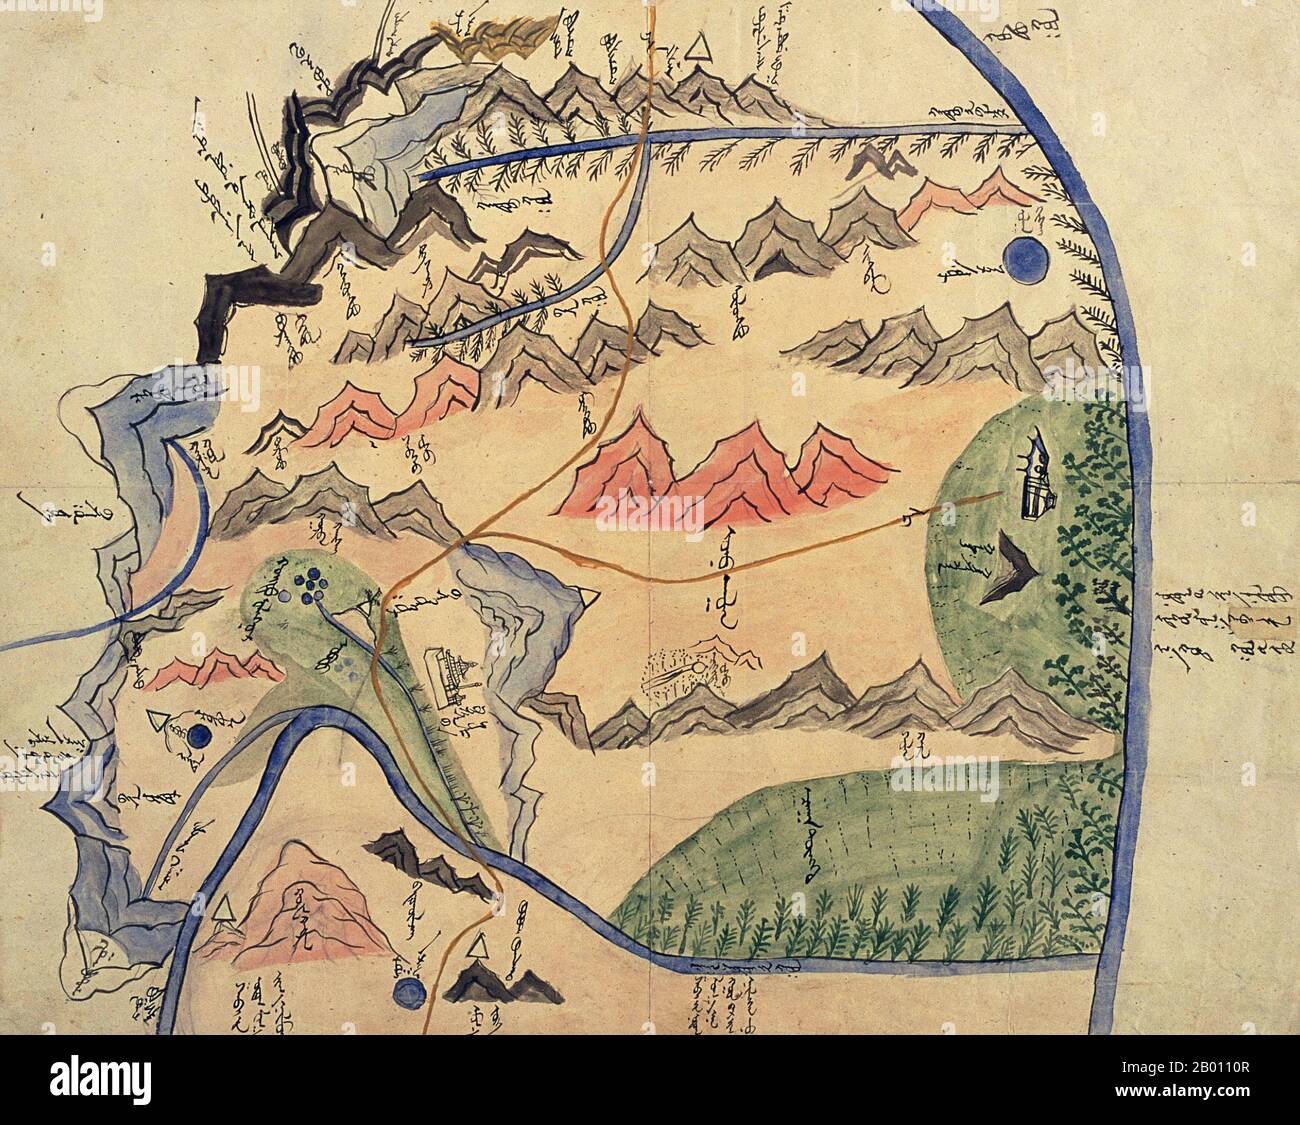 Mongolia: Map of the Jutgelt Gun's hoshuu (banner) of the Altai Urianhai in western Mongolia (1912-1914).   Material is Chinese paper, original size is 36x45 cm. Stock Photo